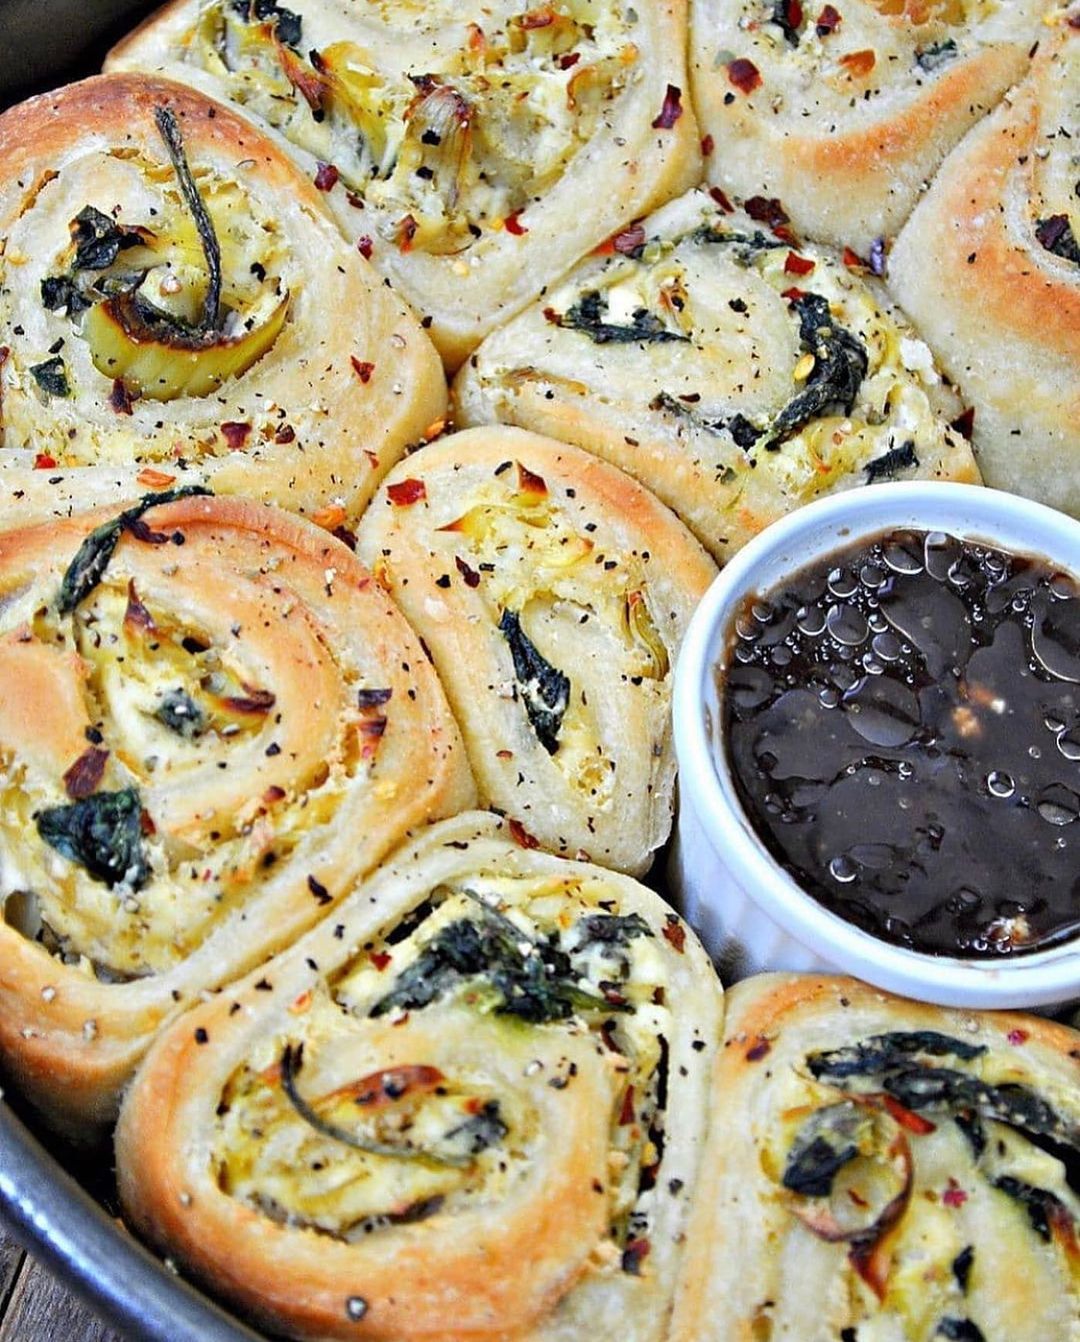 ​Savory Spinach and Artichoke Rolls